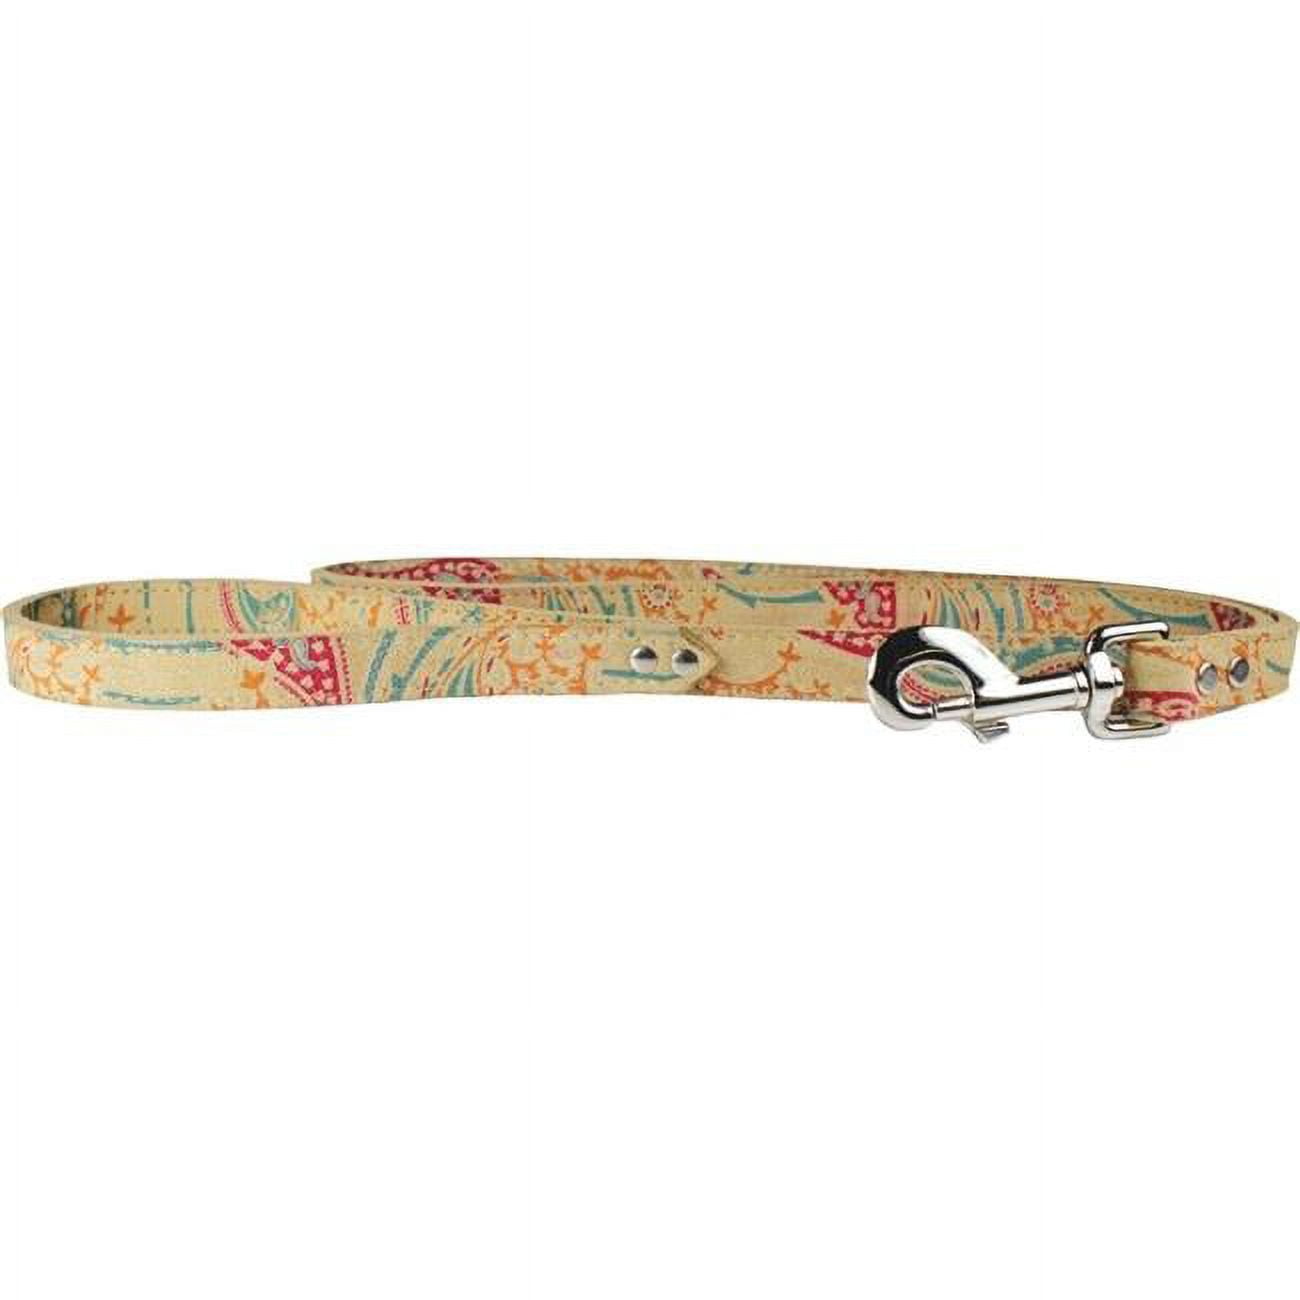 Picture of Leather Brothers 6255-SD 0.75 x 4 ft. Paisley Dog Leash, Sand